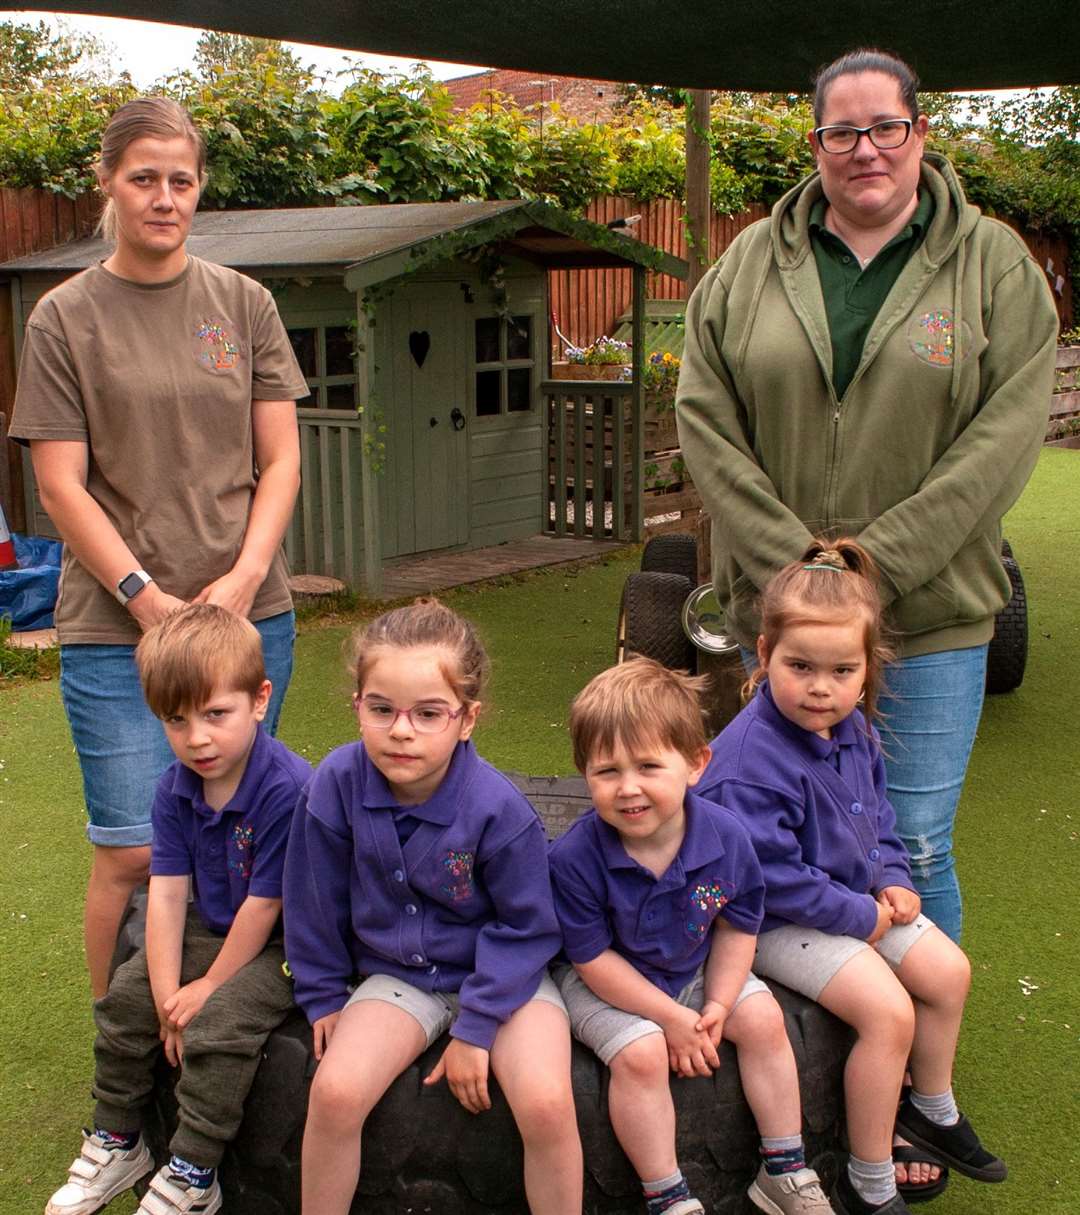 South Wootton Pre-School, pictured left, manager Rose Auker, and right, owner Lisa Carter, with Theo, Evie, Harrison and Poppy at their play area